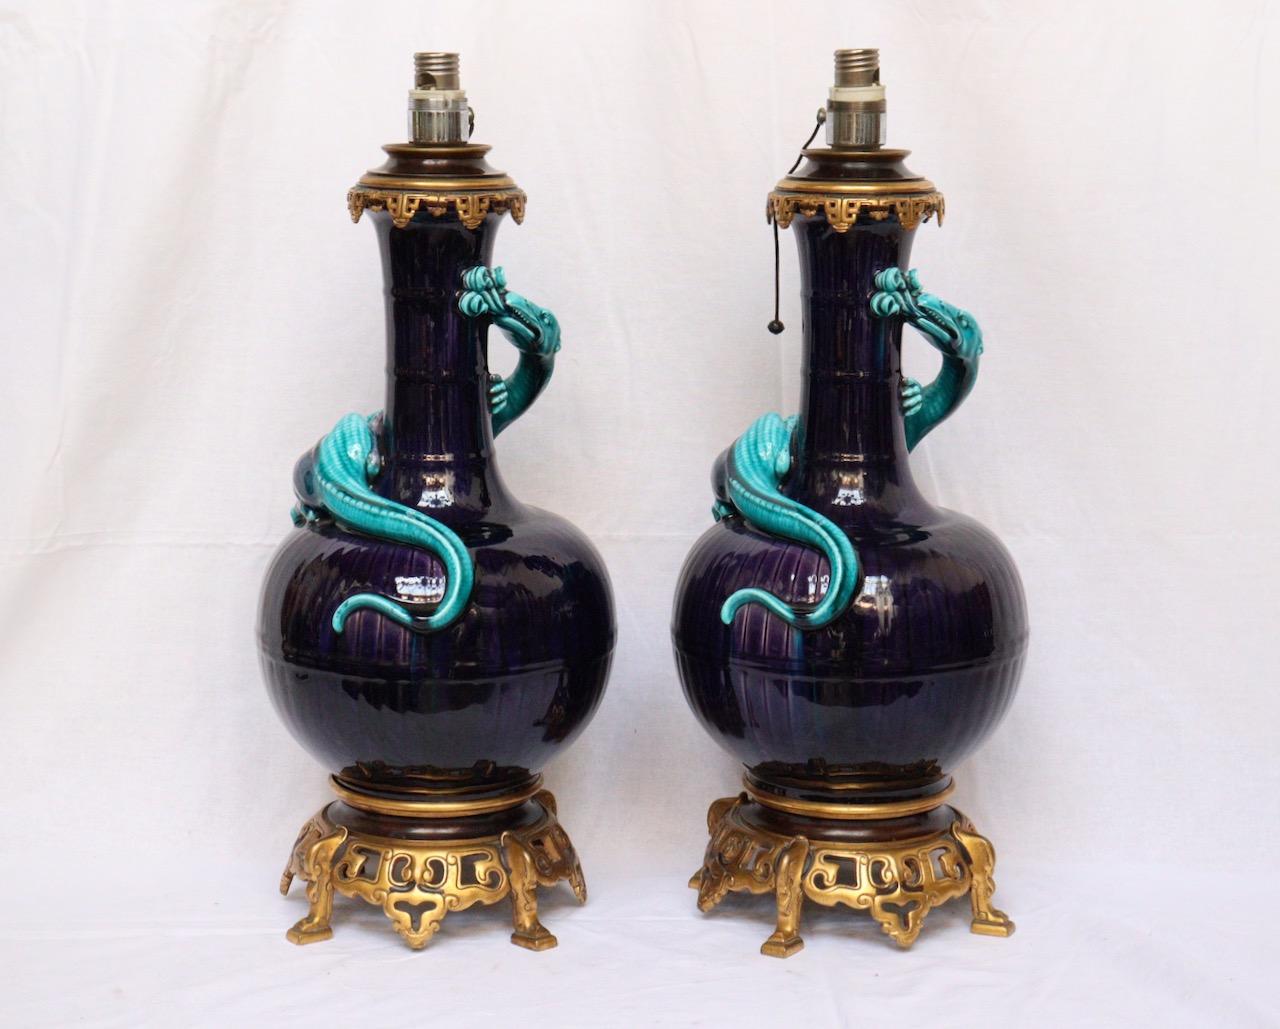 Théodore Deck (1823-1891)
A pair of Lizards vases ormolu-mounted in lamps
Enamelled Faïence vases with Aubergine background imitating basketry, Adorned with typically Blue Deck Salamanders. 
Top quality openwork gilt and aubergine patinated